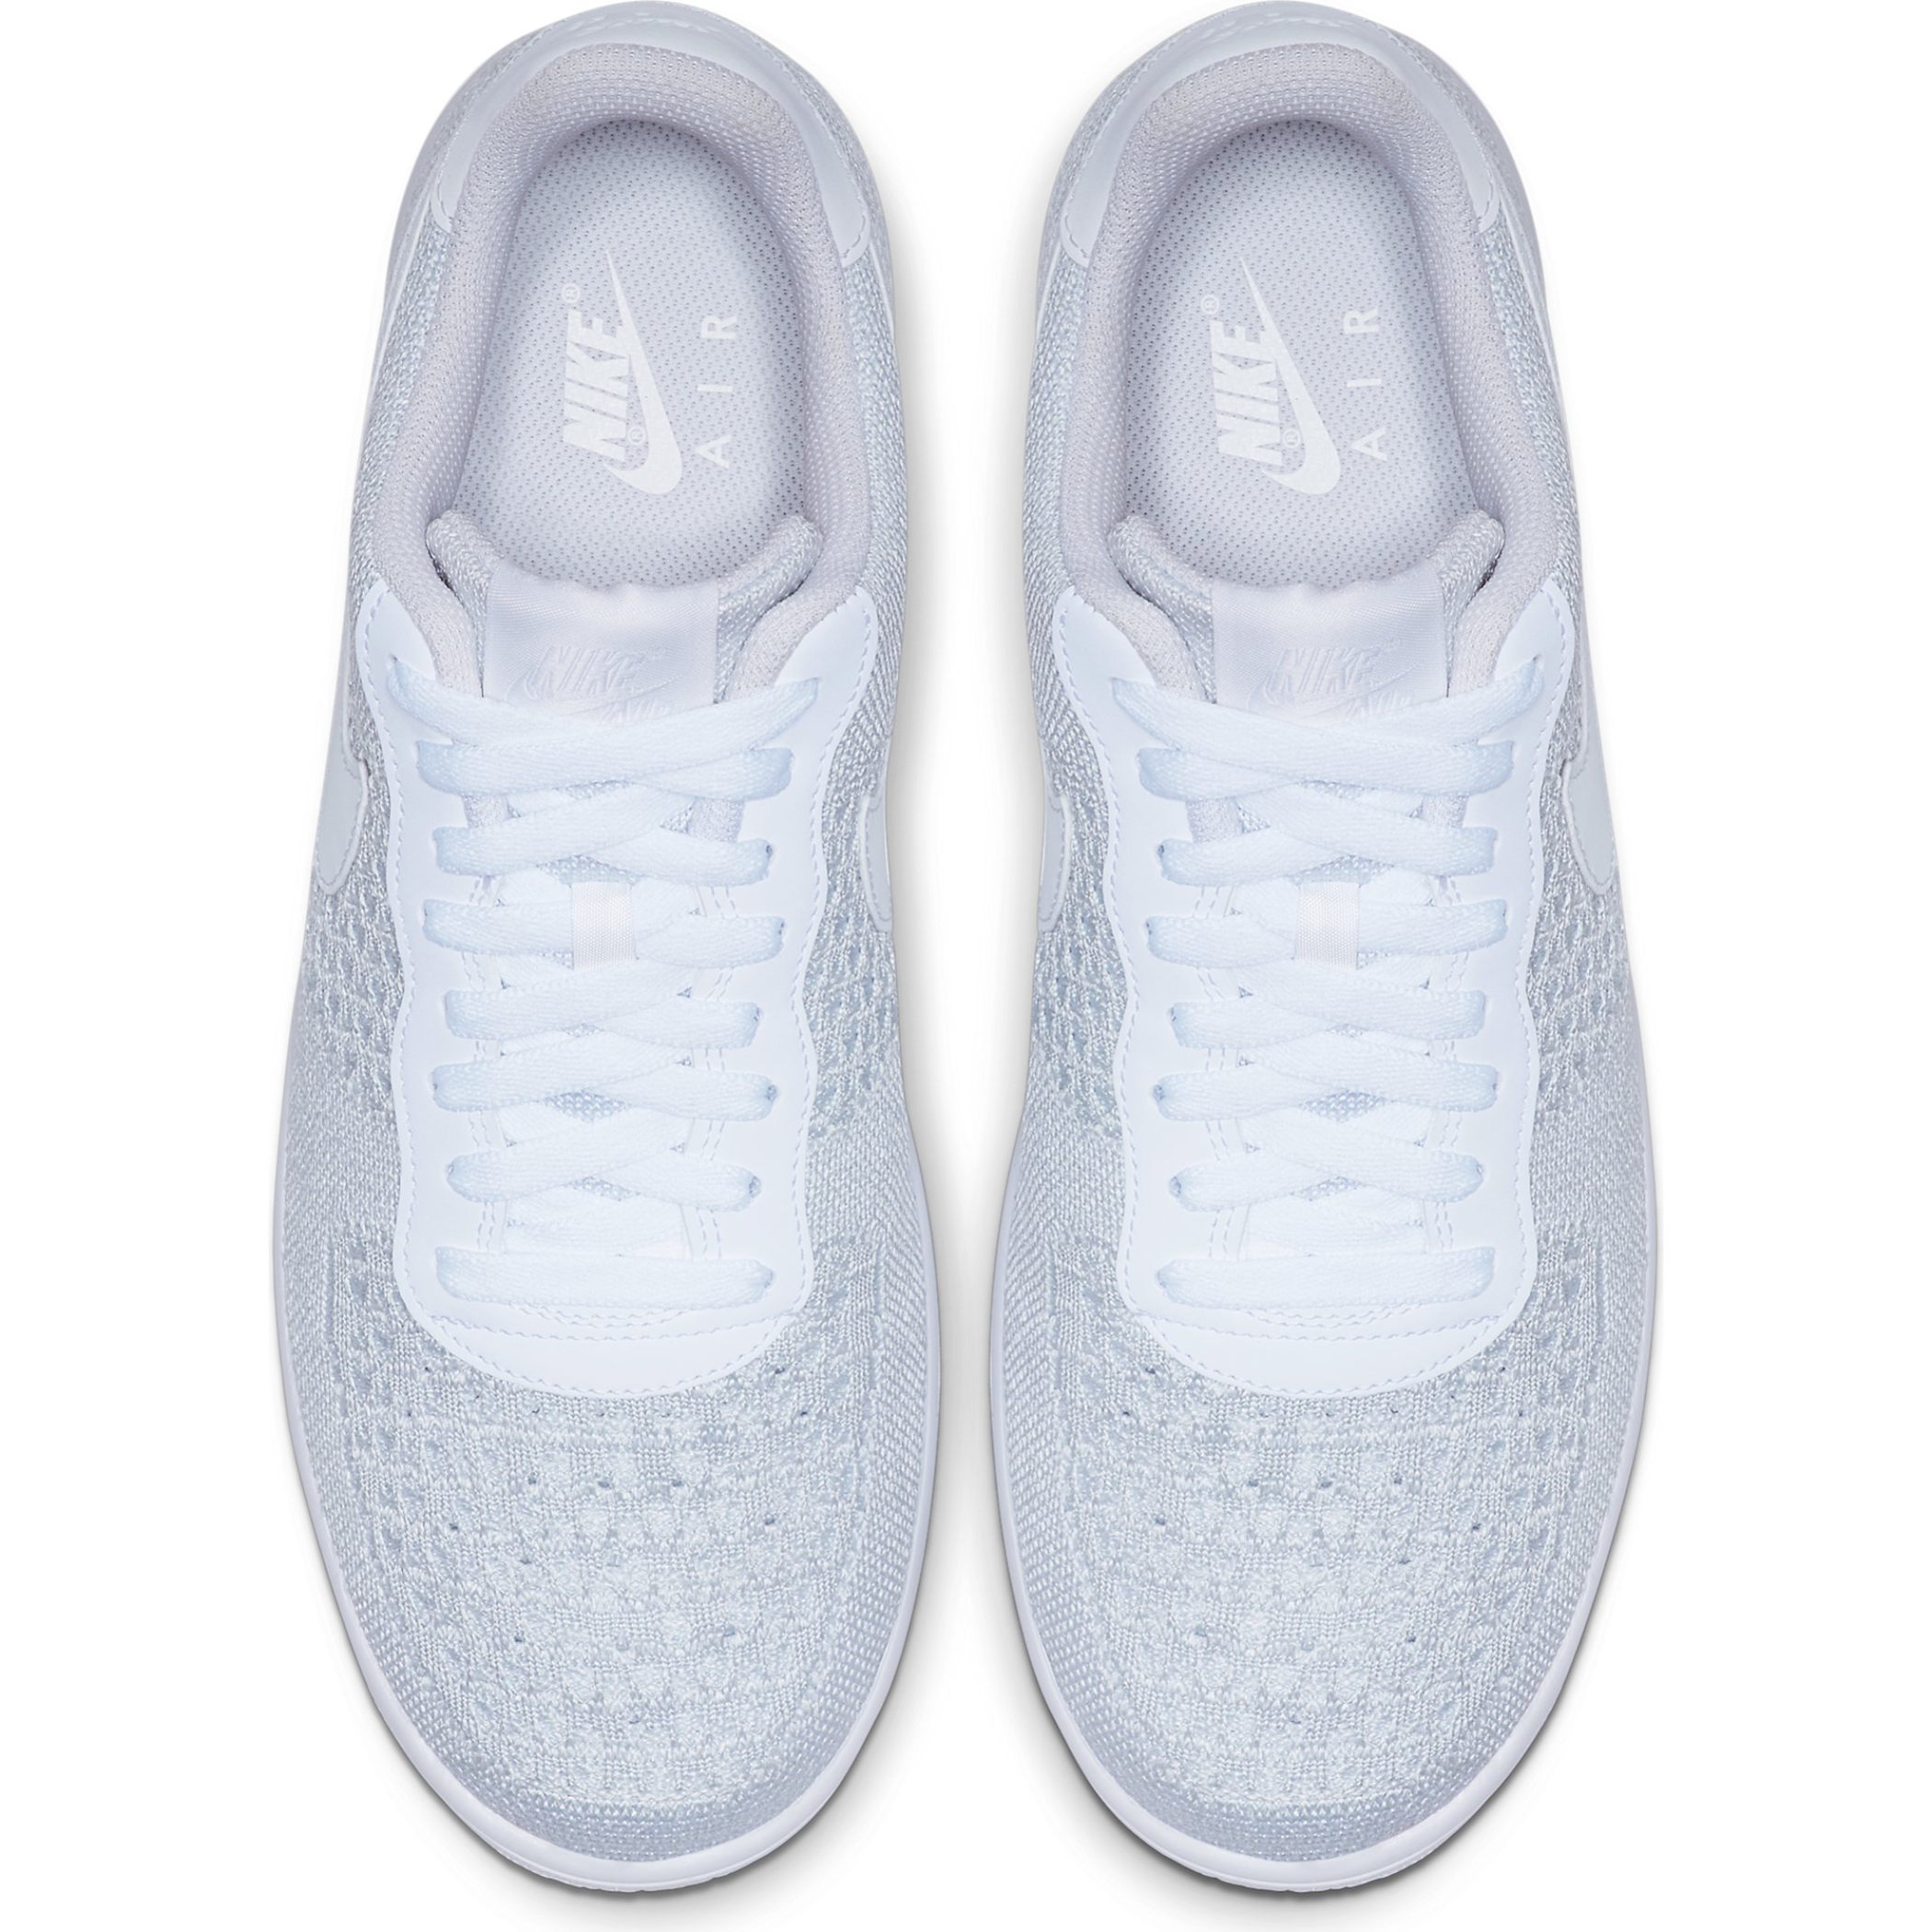 air force flyknit 2.0 white